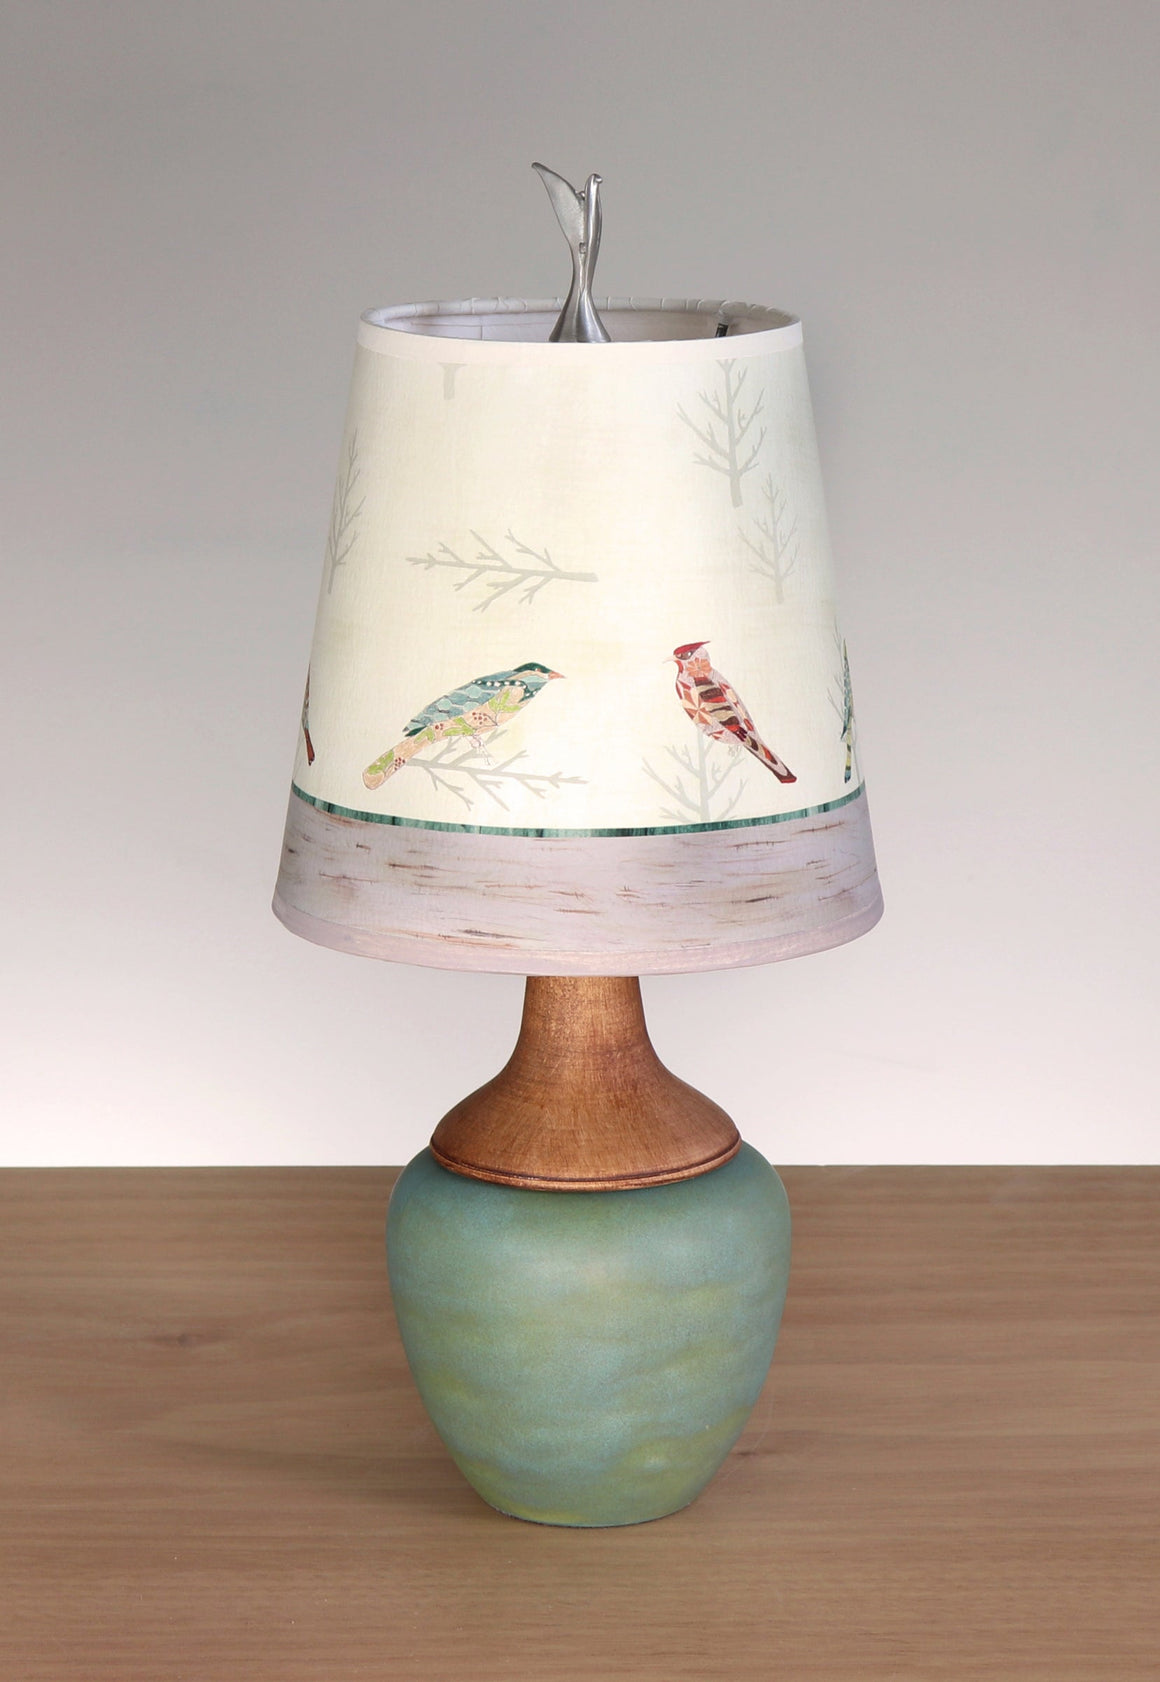 Ceramic and Maple Table Lamp with Small Drum Shade in Bird Friends